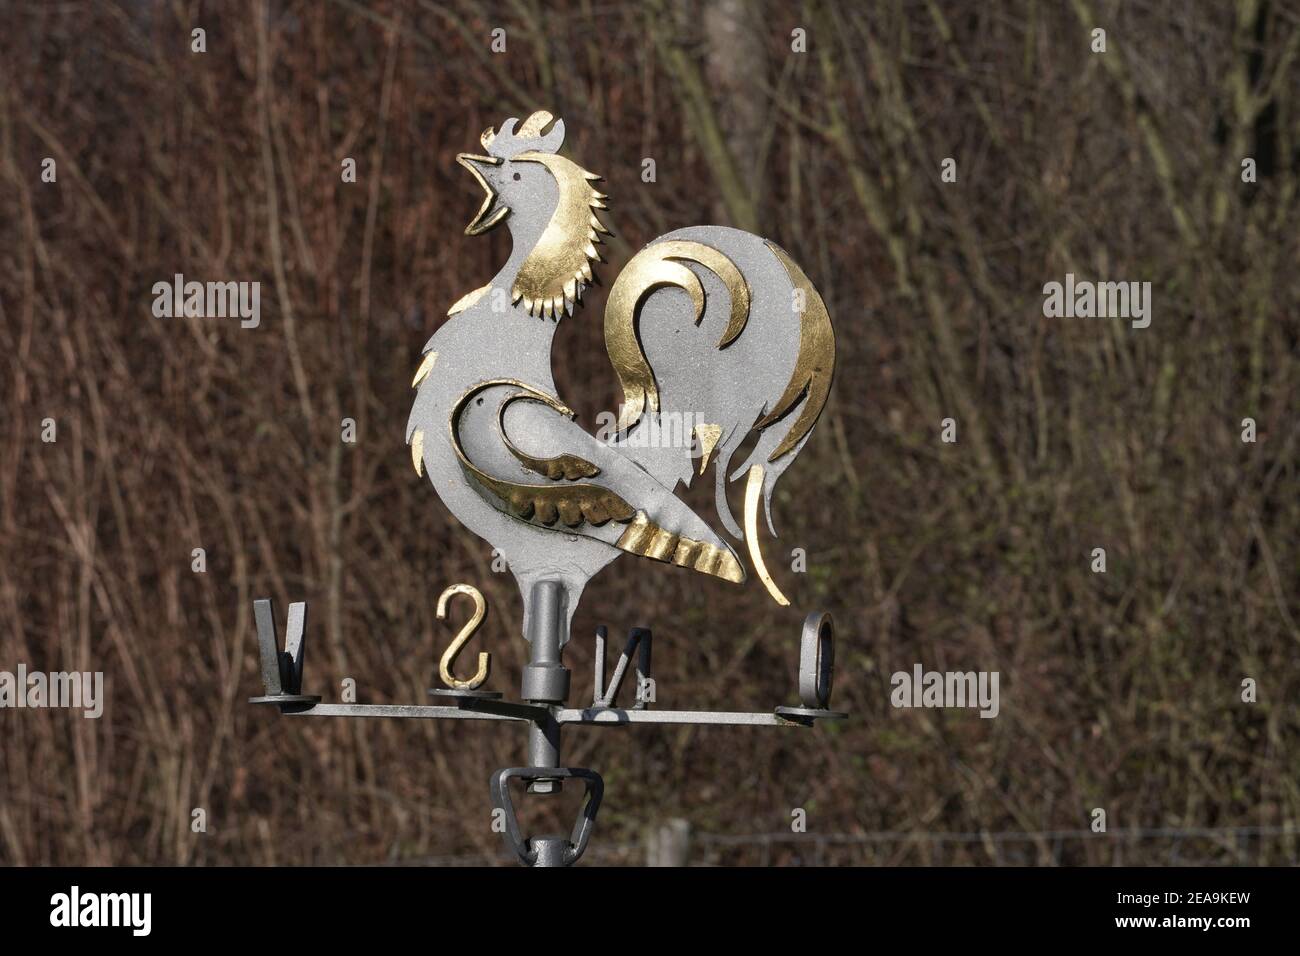 Closeup shot of a metallic rooster spinne Stock Photo